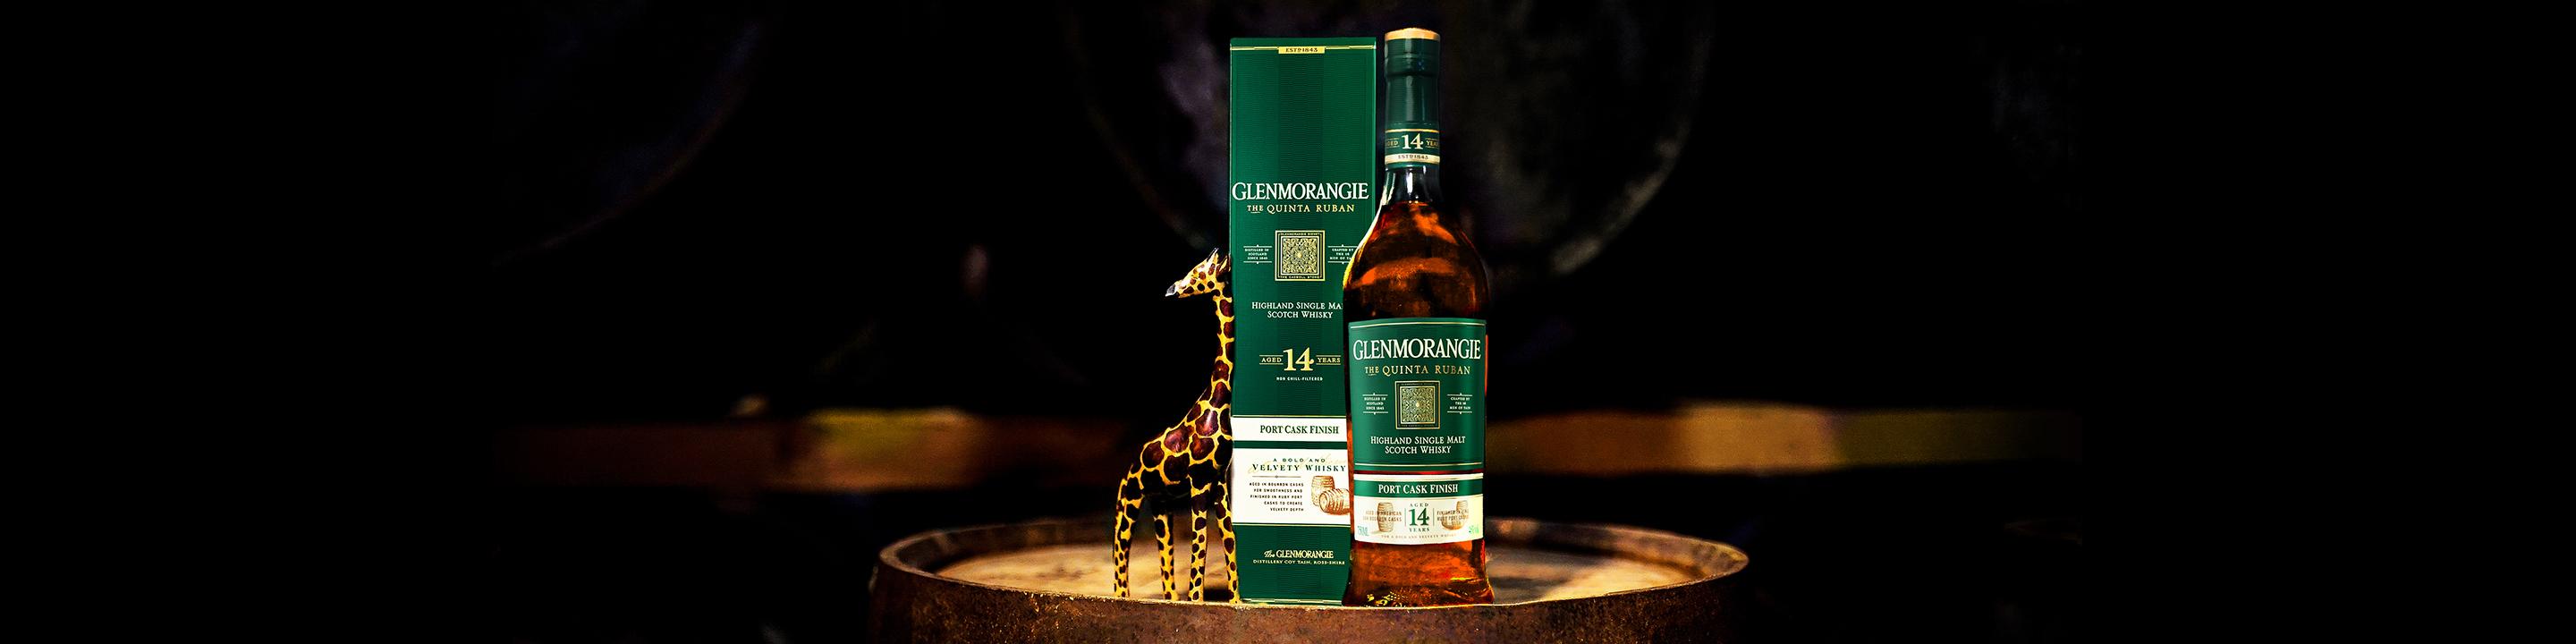 Glenmorangie Single Malt Scotch Whisky originates in the Scottish Highlands where it is distilled in the tallest malt whisky stills in Scotland, expertly matured in the finest oak casks, only used twice. Glenmorangie distillery, founded in 1843 is renowned as a pioneer in whisky making, uniting tradition with innovation. Buy Glenmorangie online now from your nearby liquor store via Minibar Delivery. 